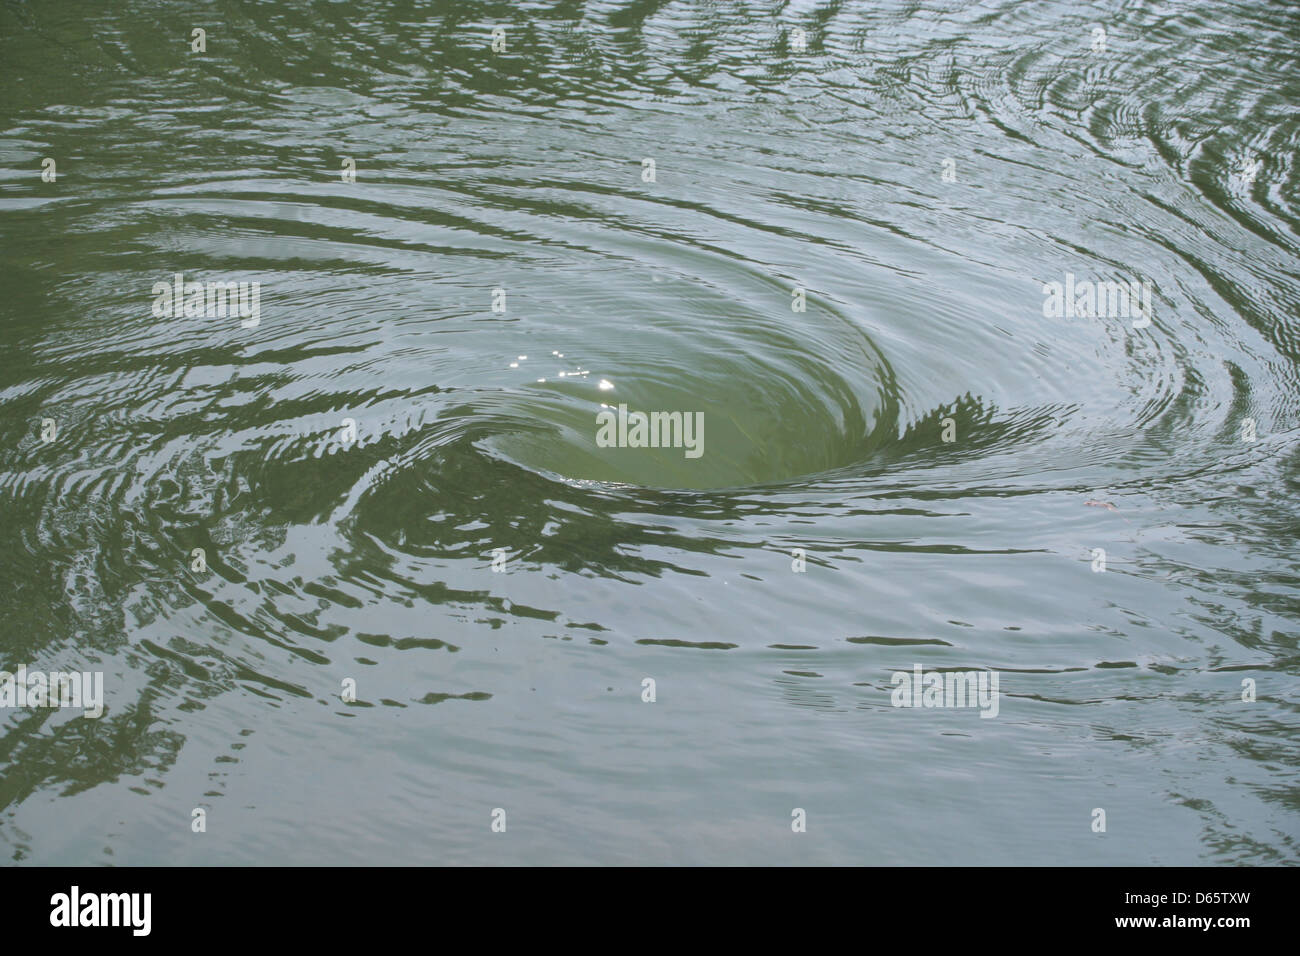 Water vortex - Stock Image - F016/7078 - Science Photo Library